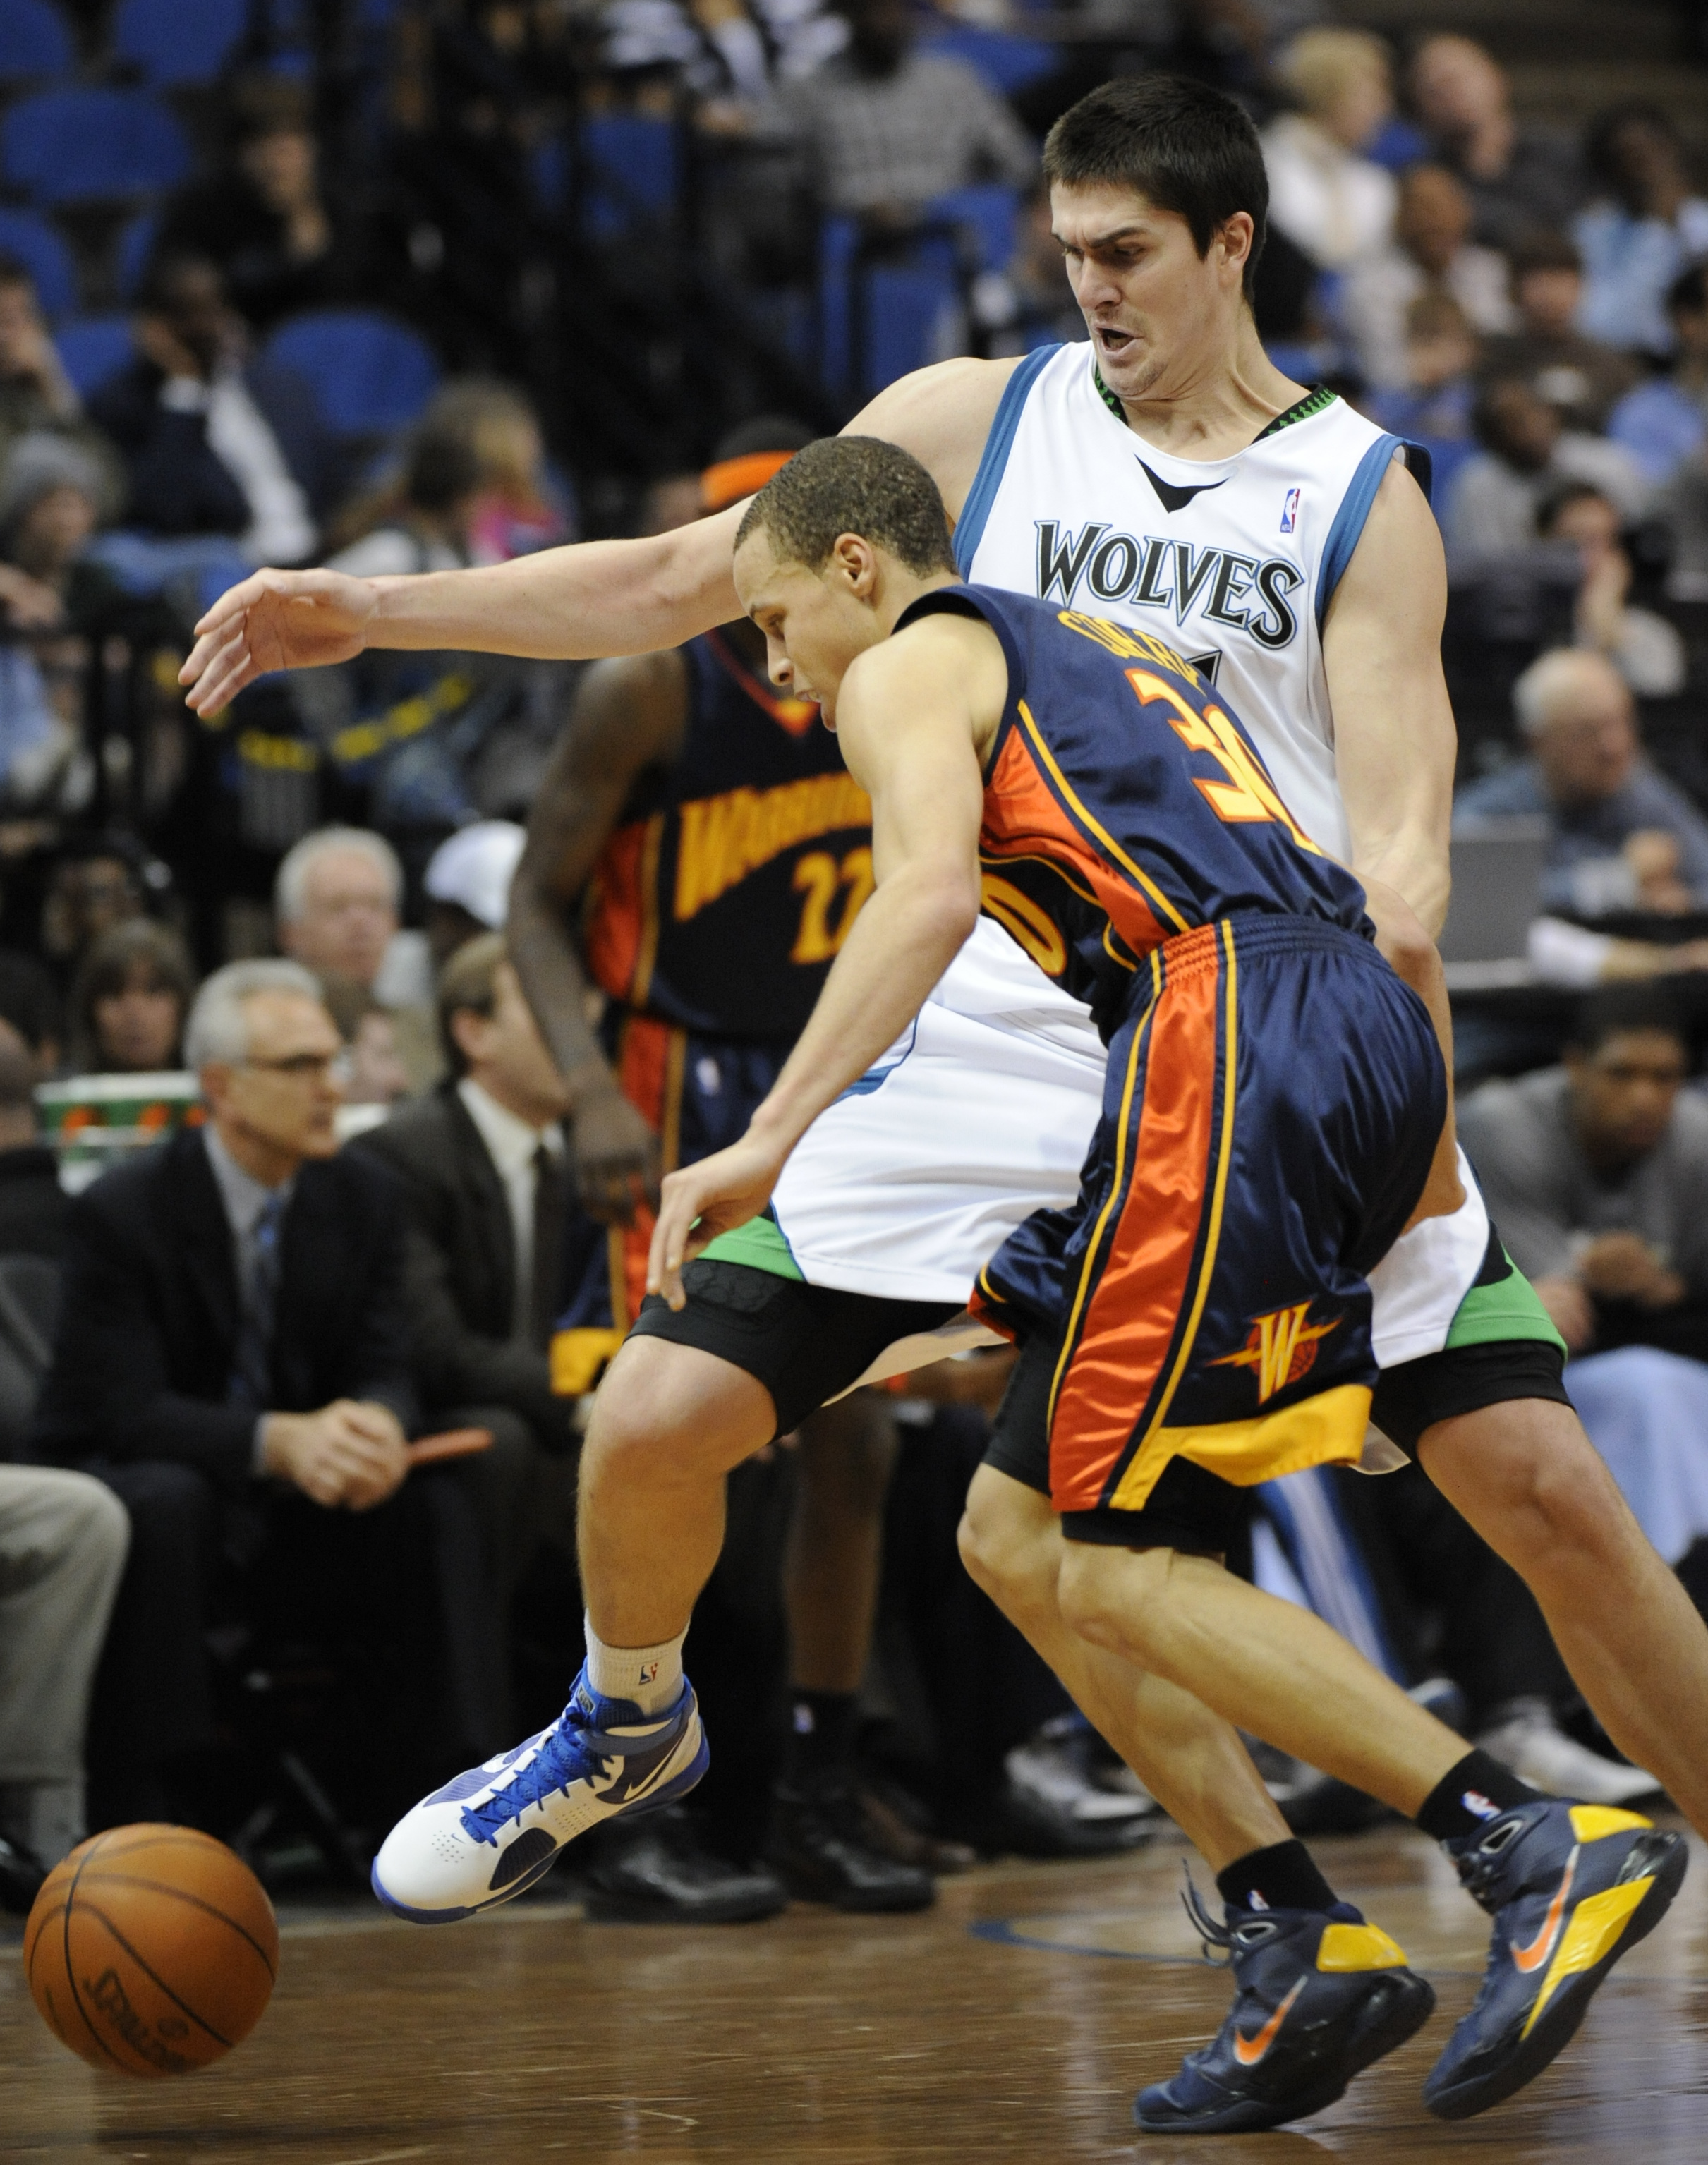 MINNEAPOLIS, MN - APRIL 7: Darko Milicic #31 of the Minnesota Timberwolves guards against Stephen Curry #30 of the Golden State Warriors in the second half of a basketball game at Target Center on April 7, 2010 in Minneapolis, Minnesota. The Warriors defe